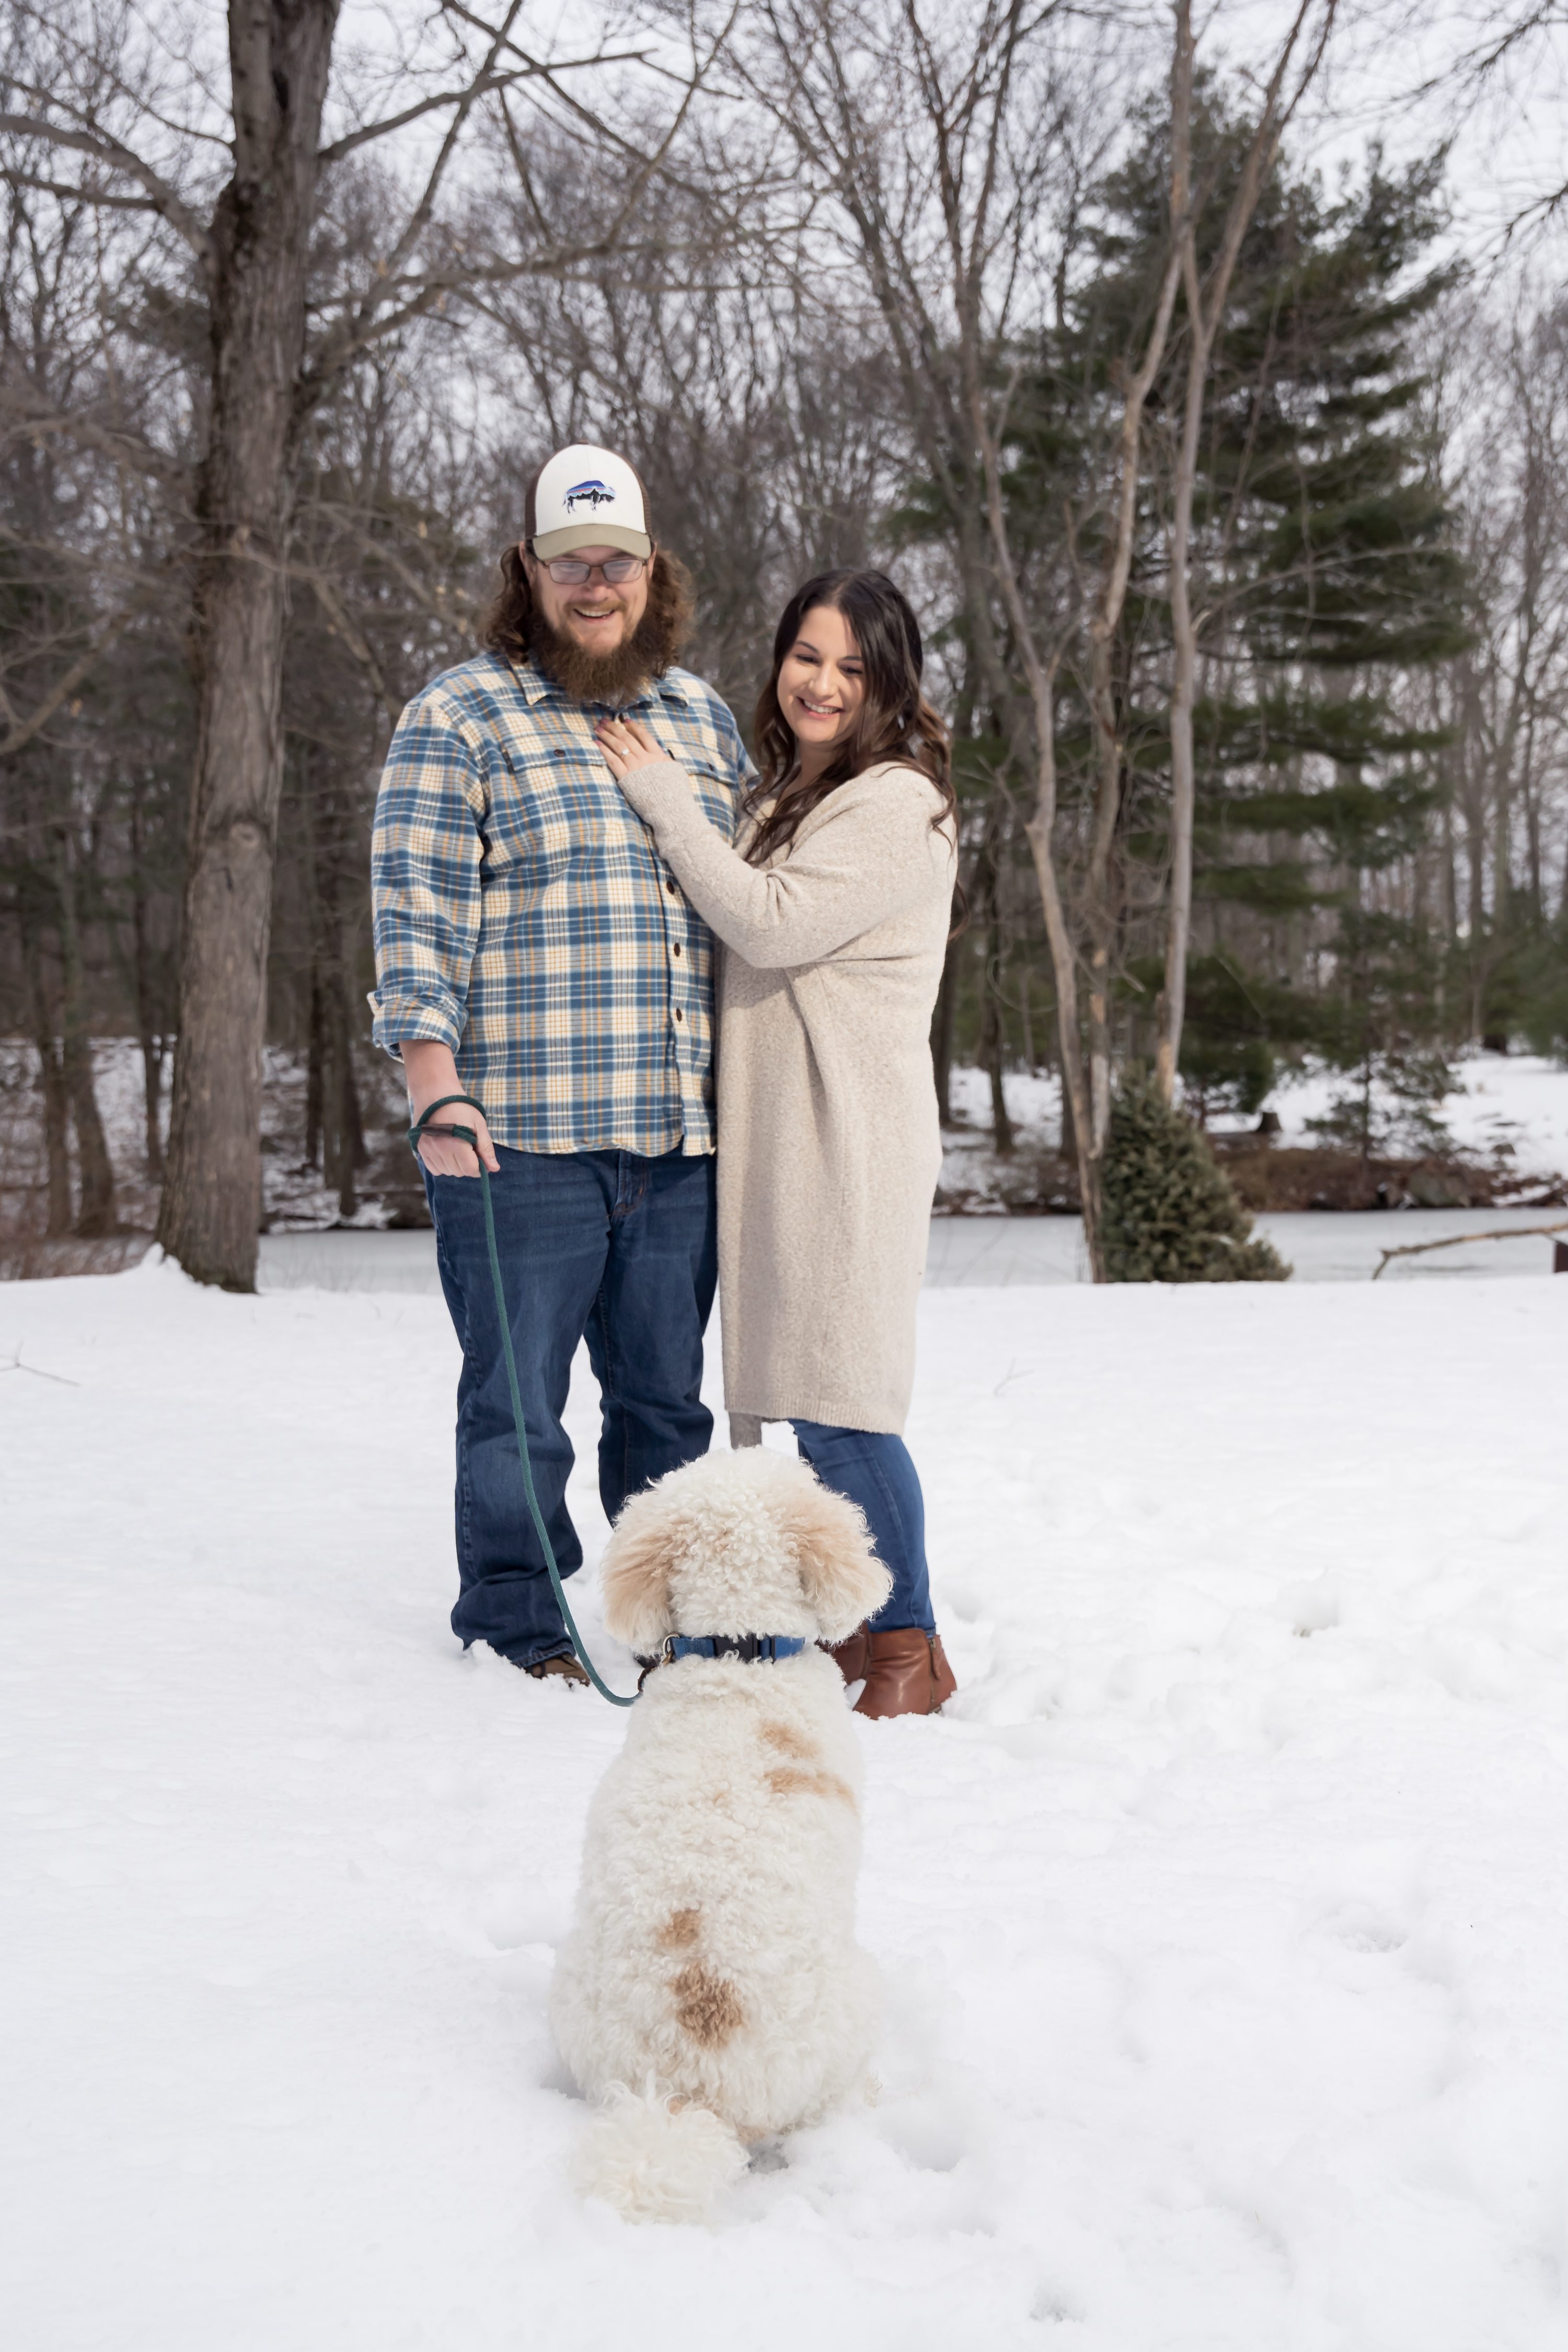 Massachusetts Wedding Photographer,Engagement Session with dog,Incorporating Dogs at Engagement Session,Massachusetts Engagement Photographer